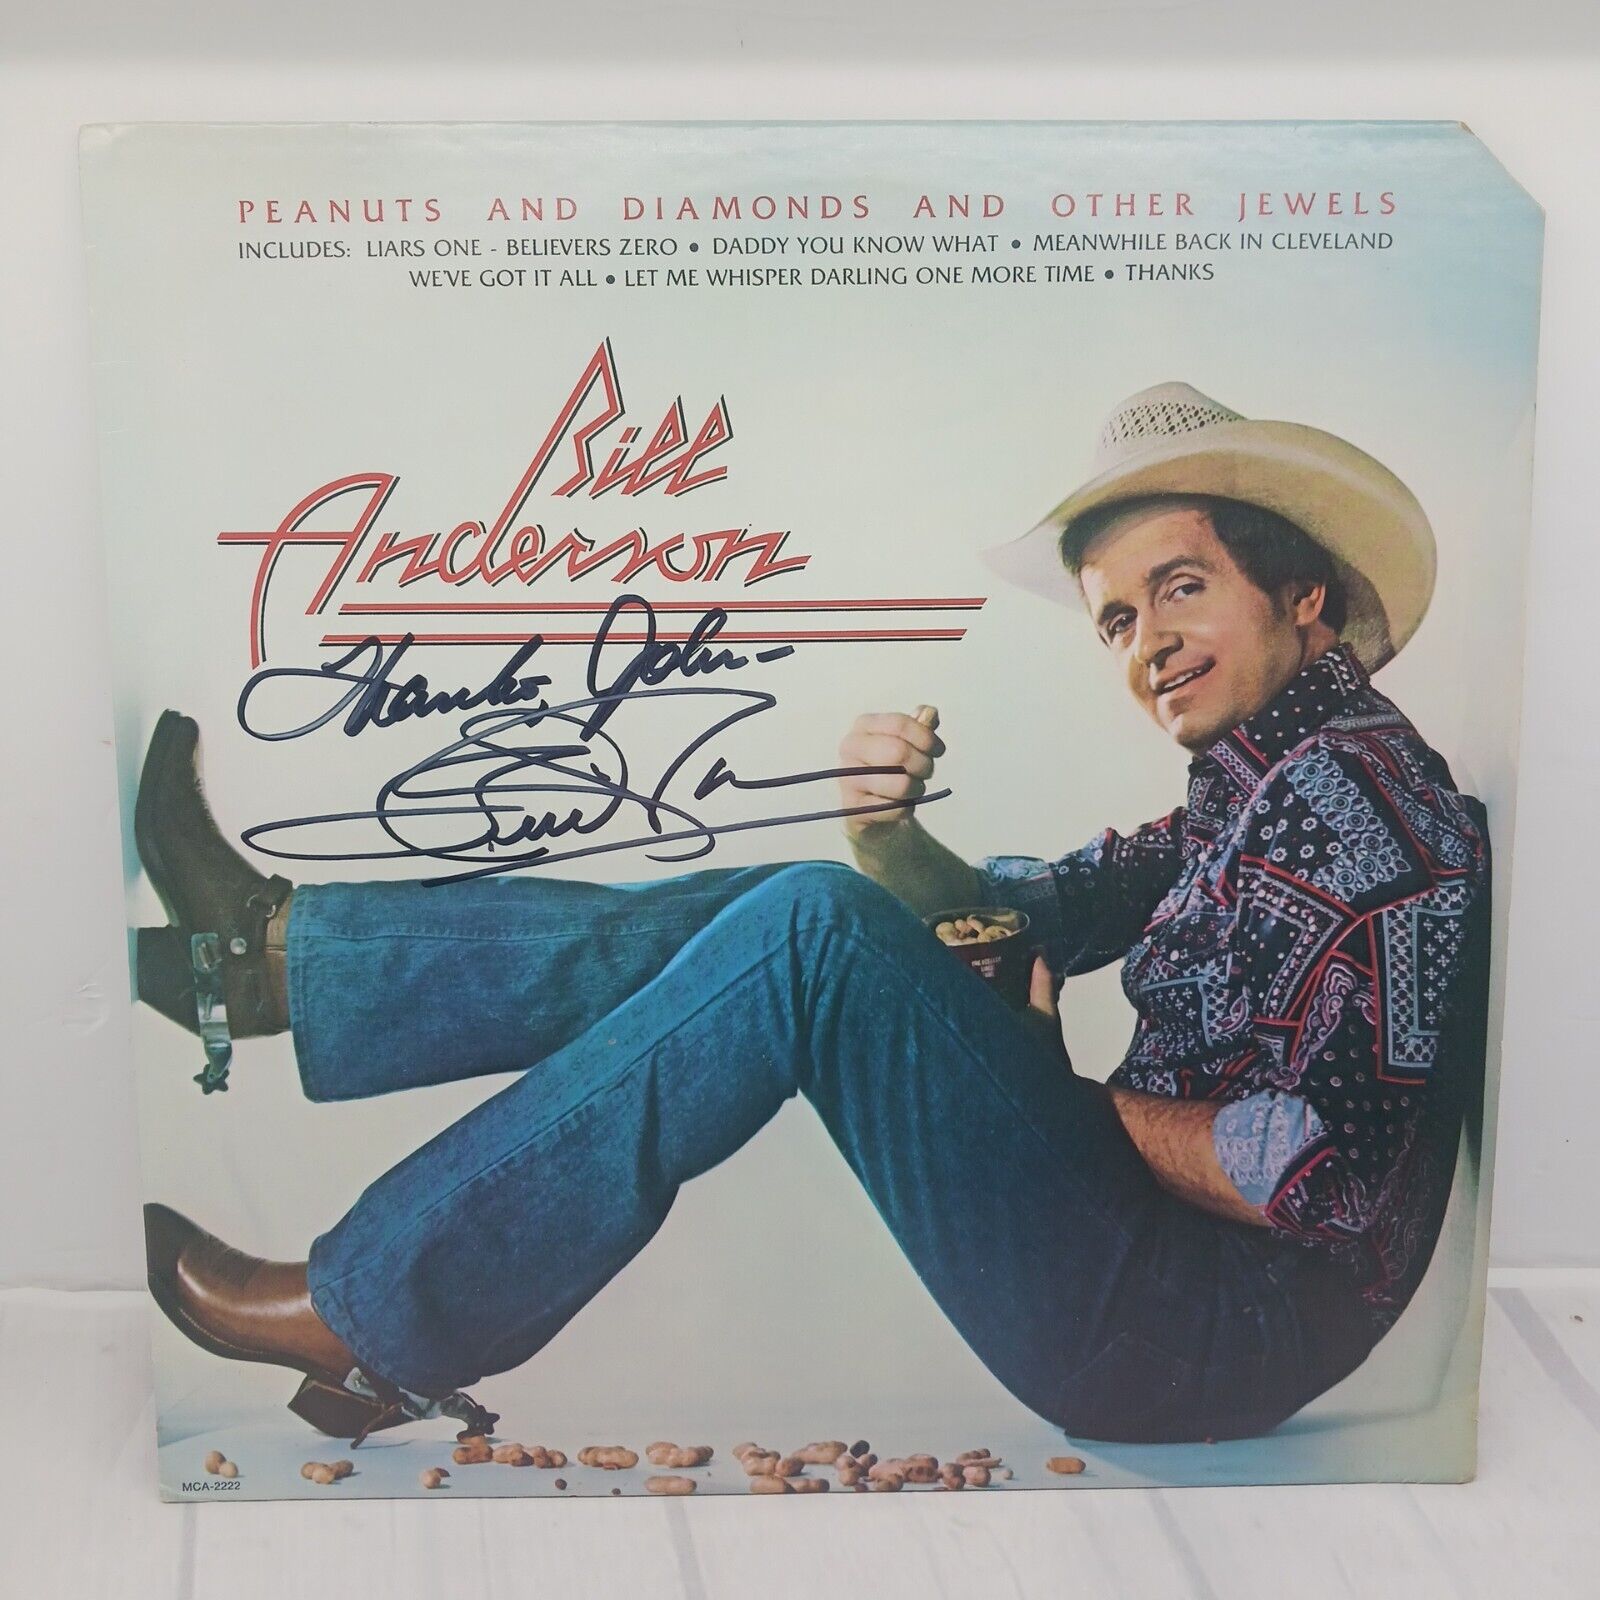 Bill Anderson Autographed 